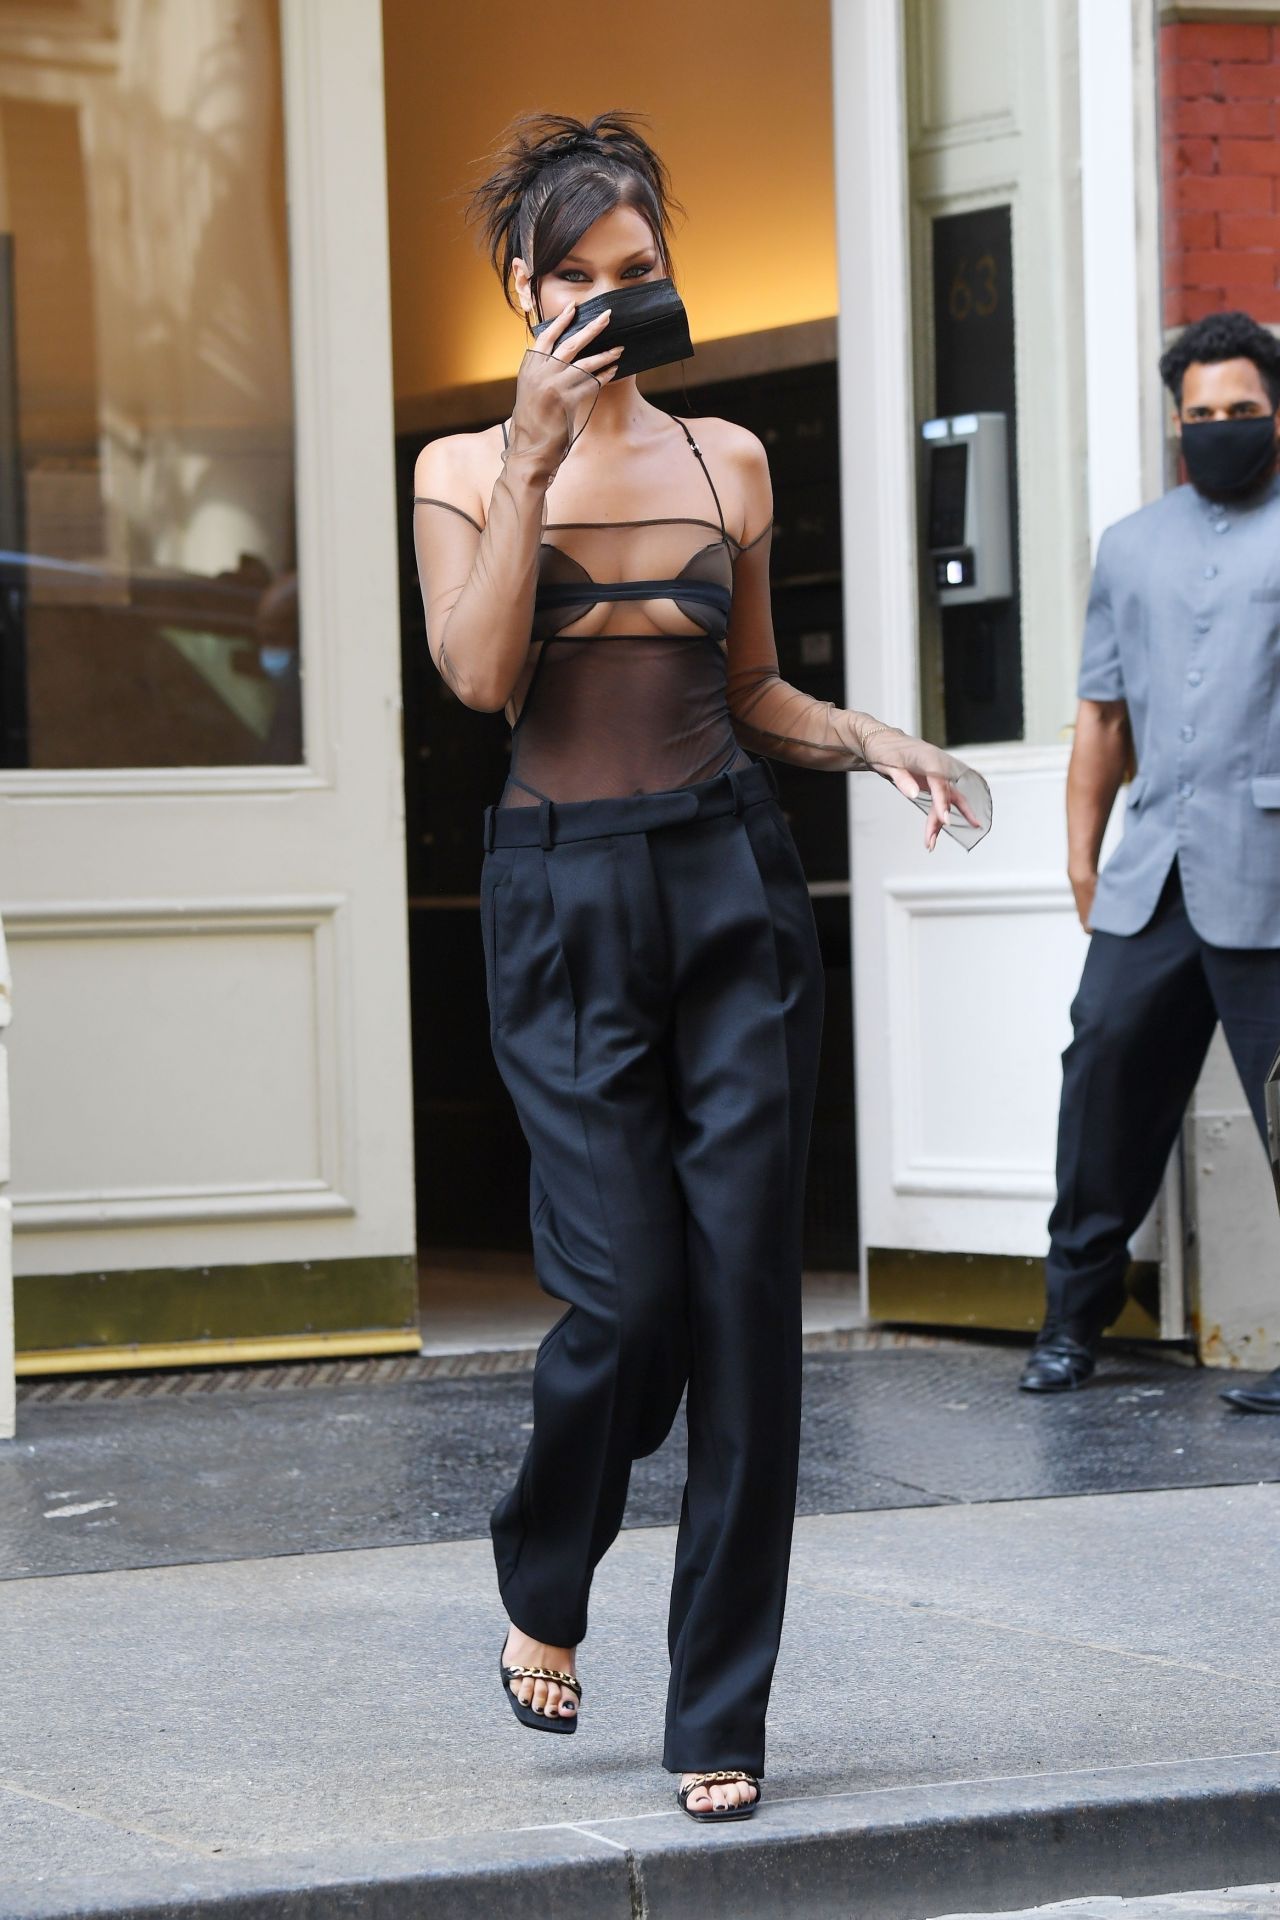 bella-hadid-out-in-new-york-city-08-28-2020-0.jpg